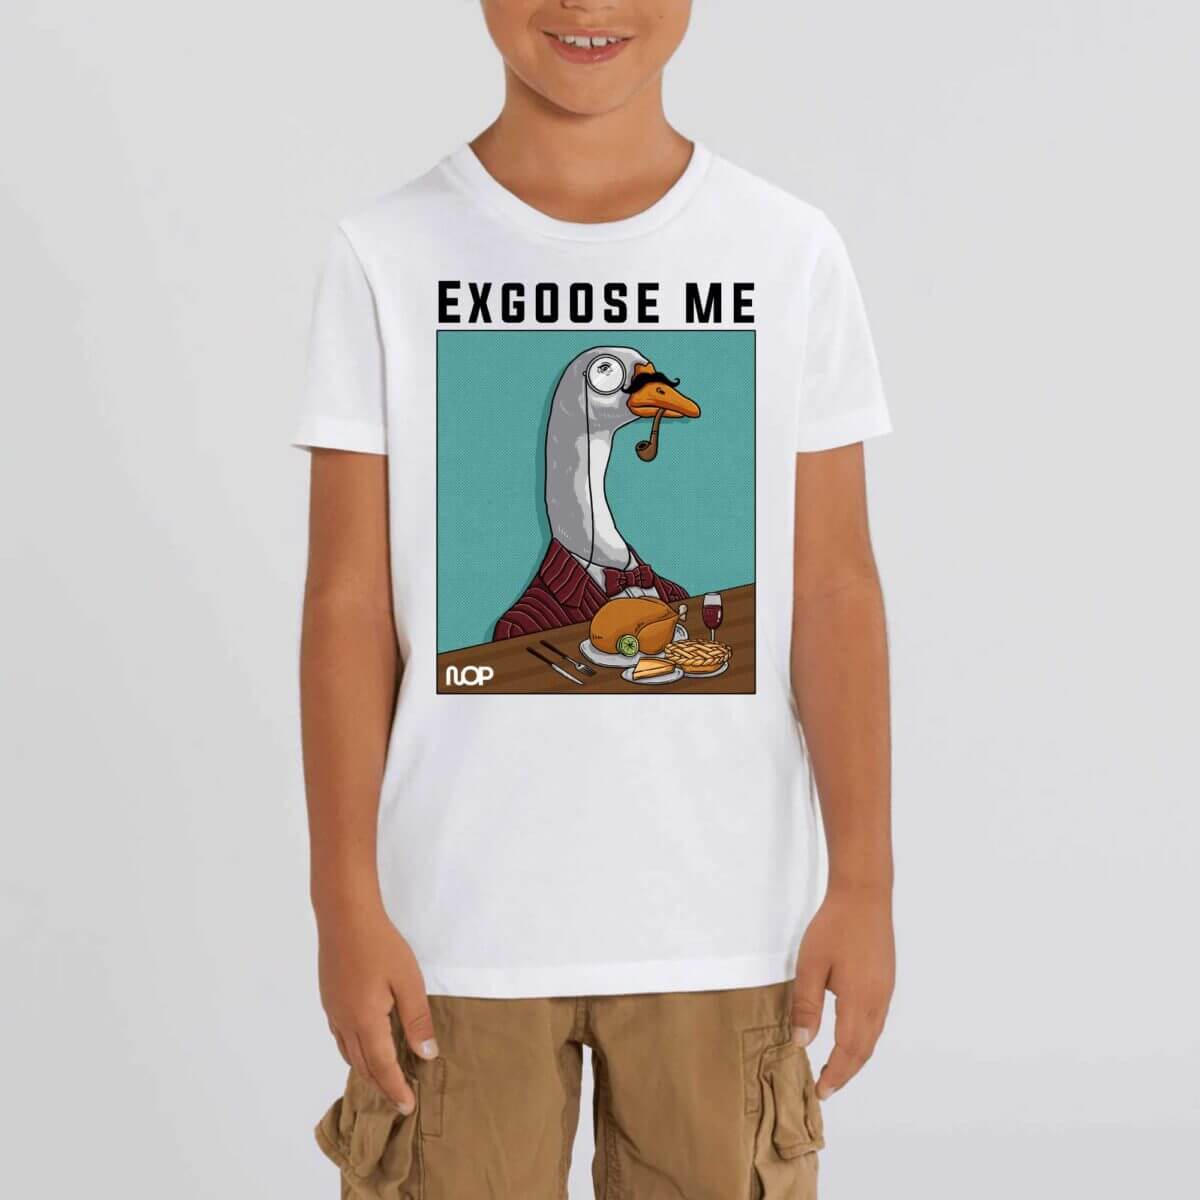 The Streets Kids Exgoose me T-shirt